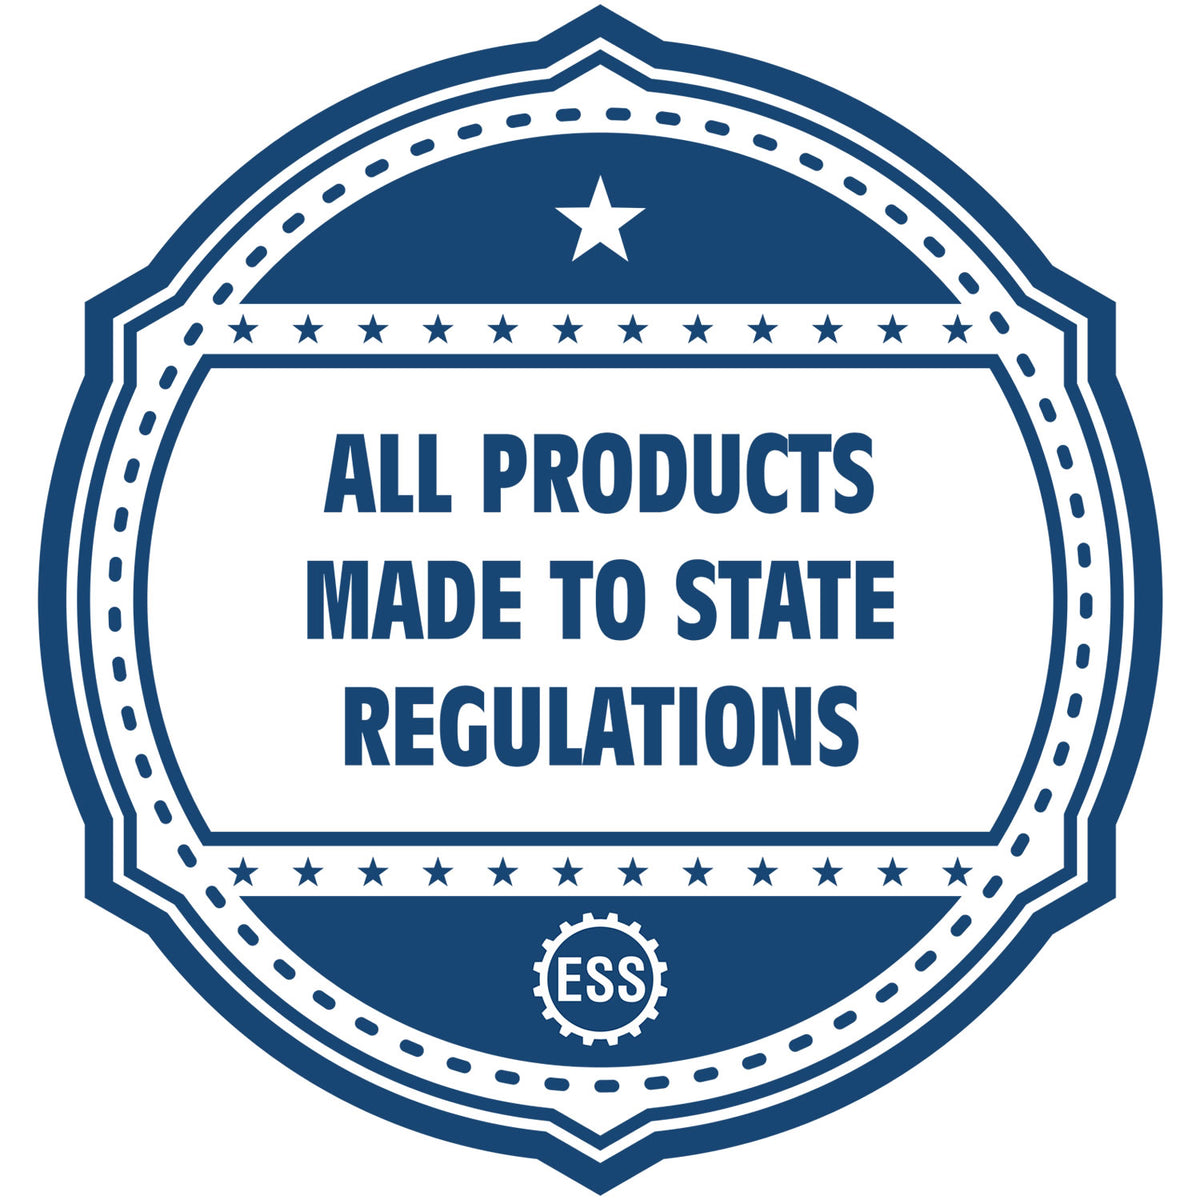 An icon or badge element for the Slim Pre-Inked Maine Land Surveyor Seal Stamp showing that this product is made in compliance with state regulations.